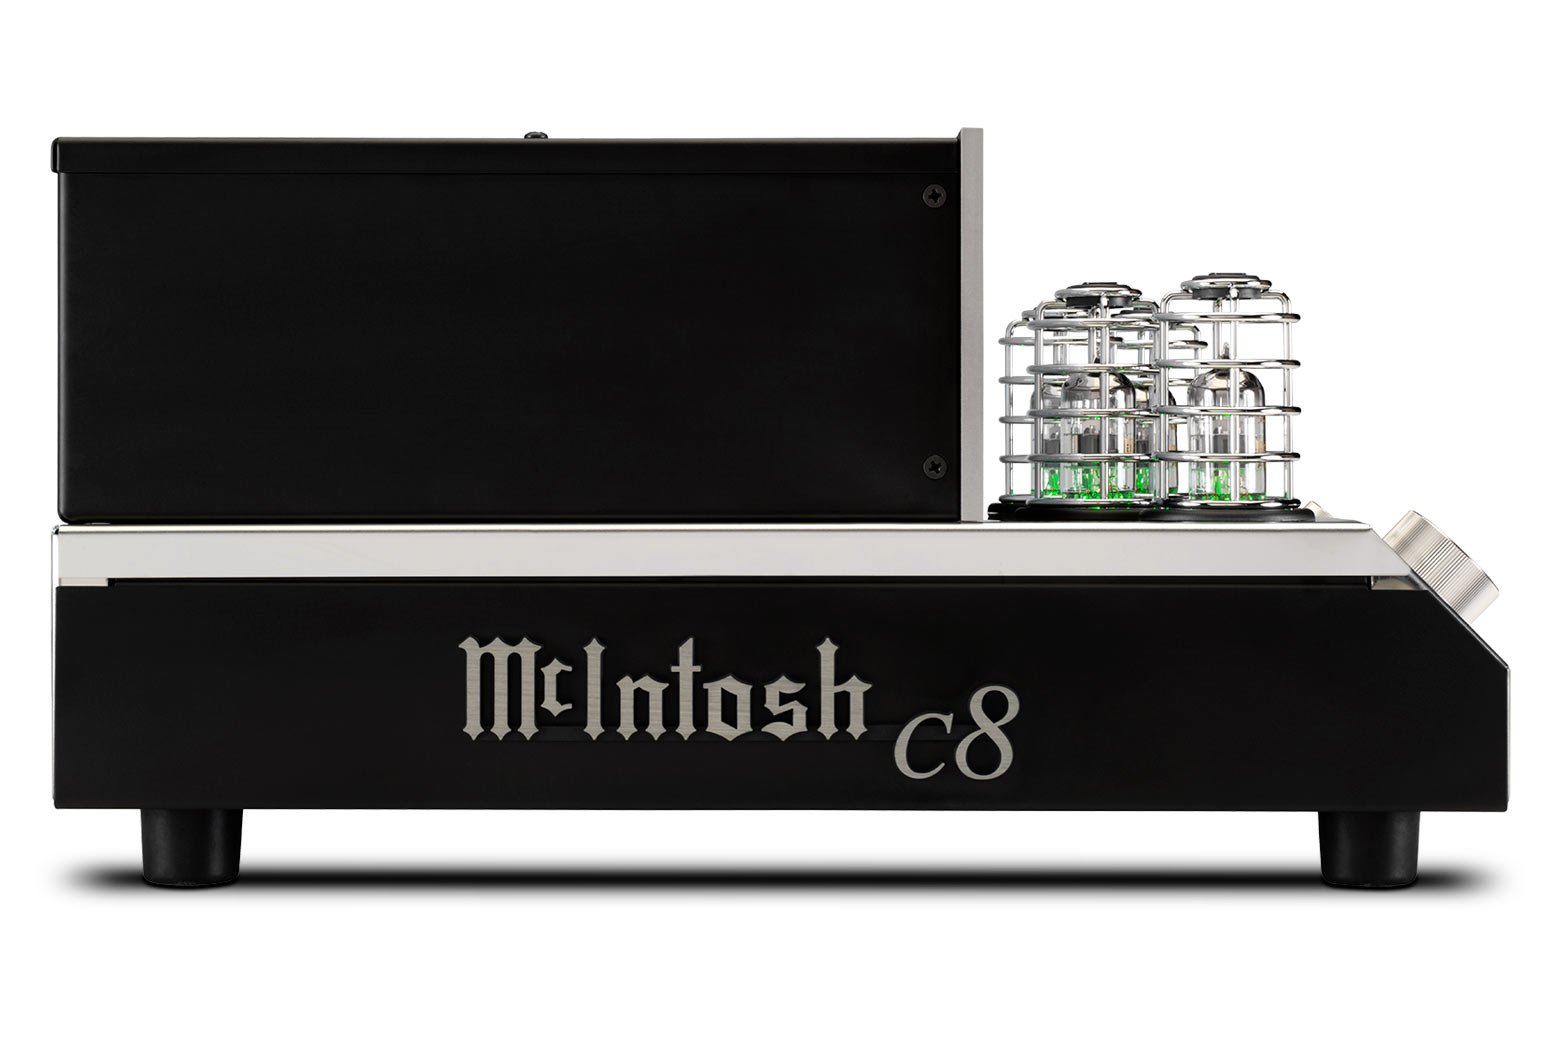 Mcintosh C8 Tube Preamplifier side angle 